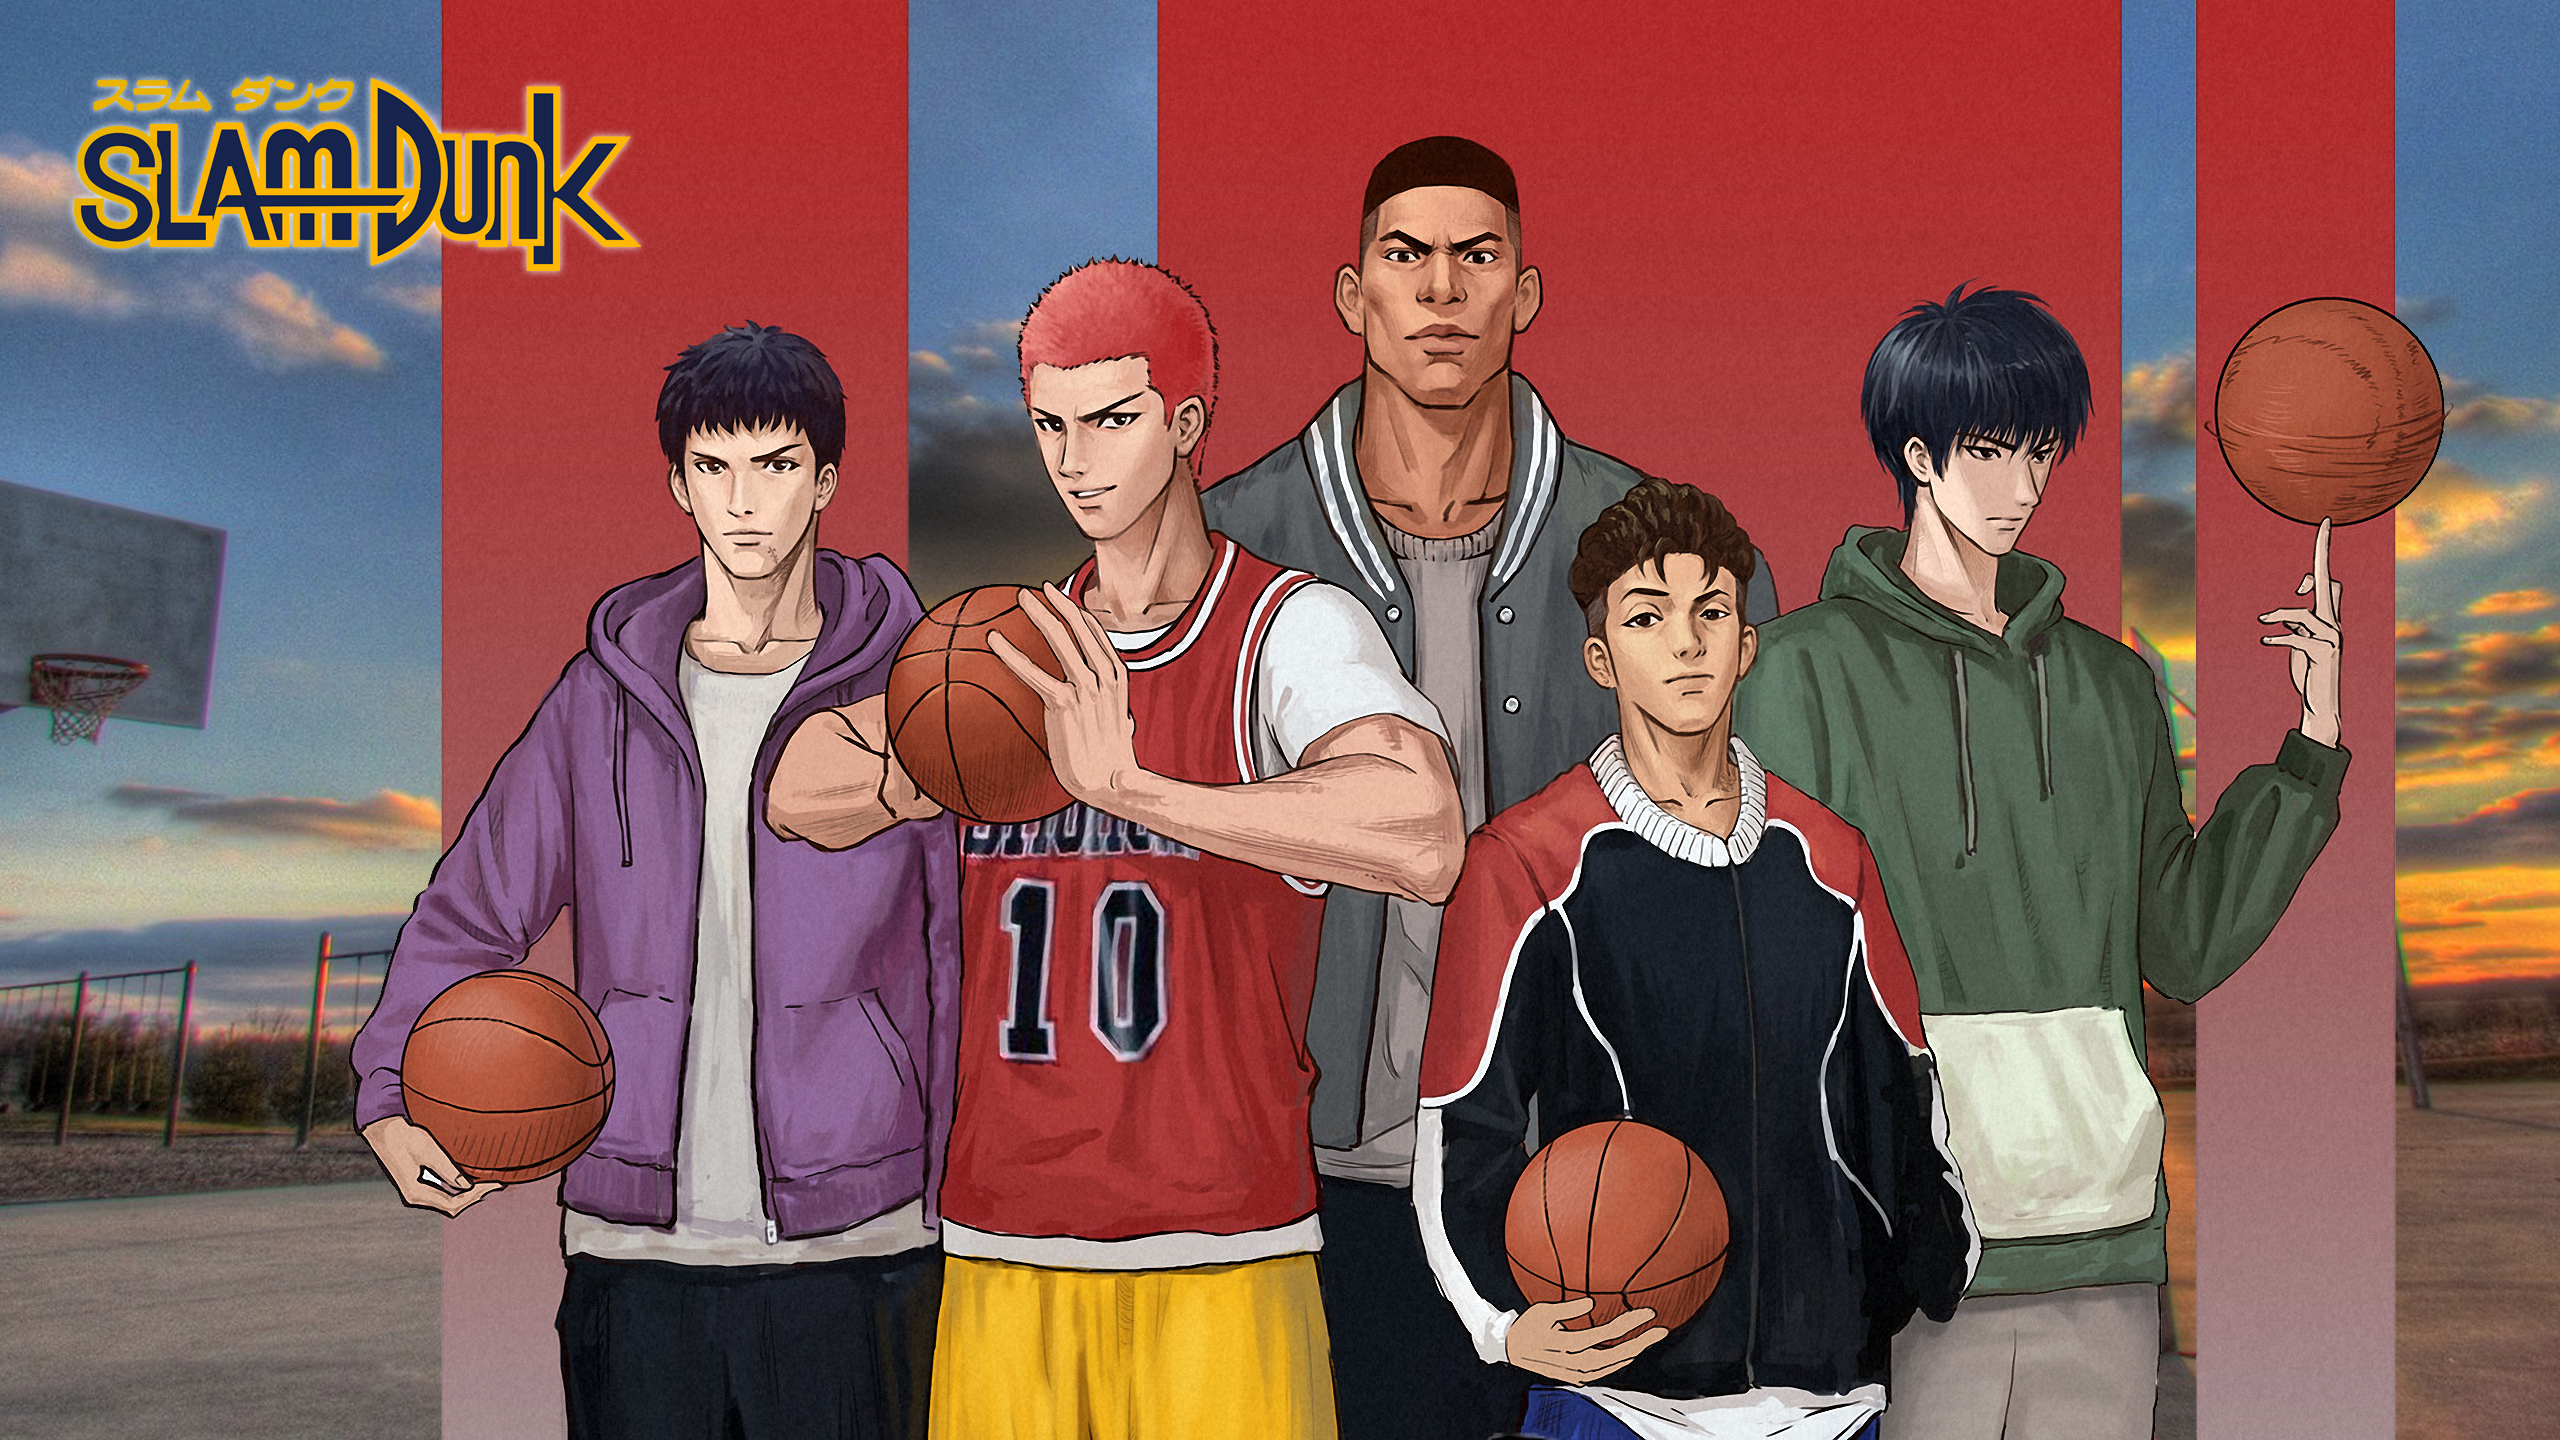 Ive noticed that there are very few desktop wallpaper of slam dunk which  are both big and pretty so i made one myself Enjoy this collage   rRealSlamDunk